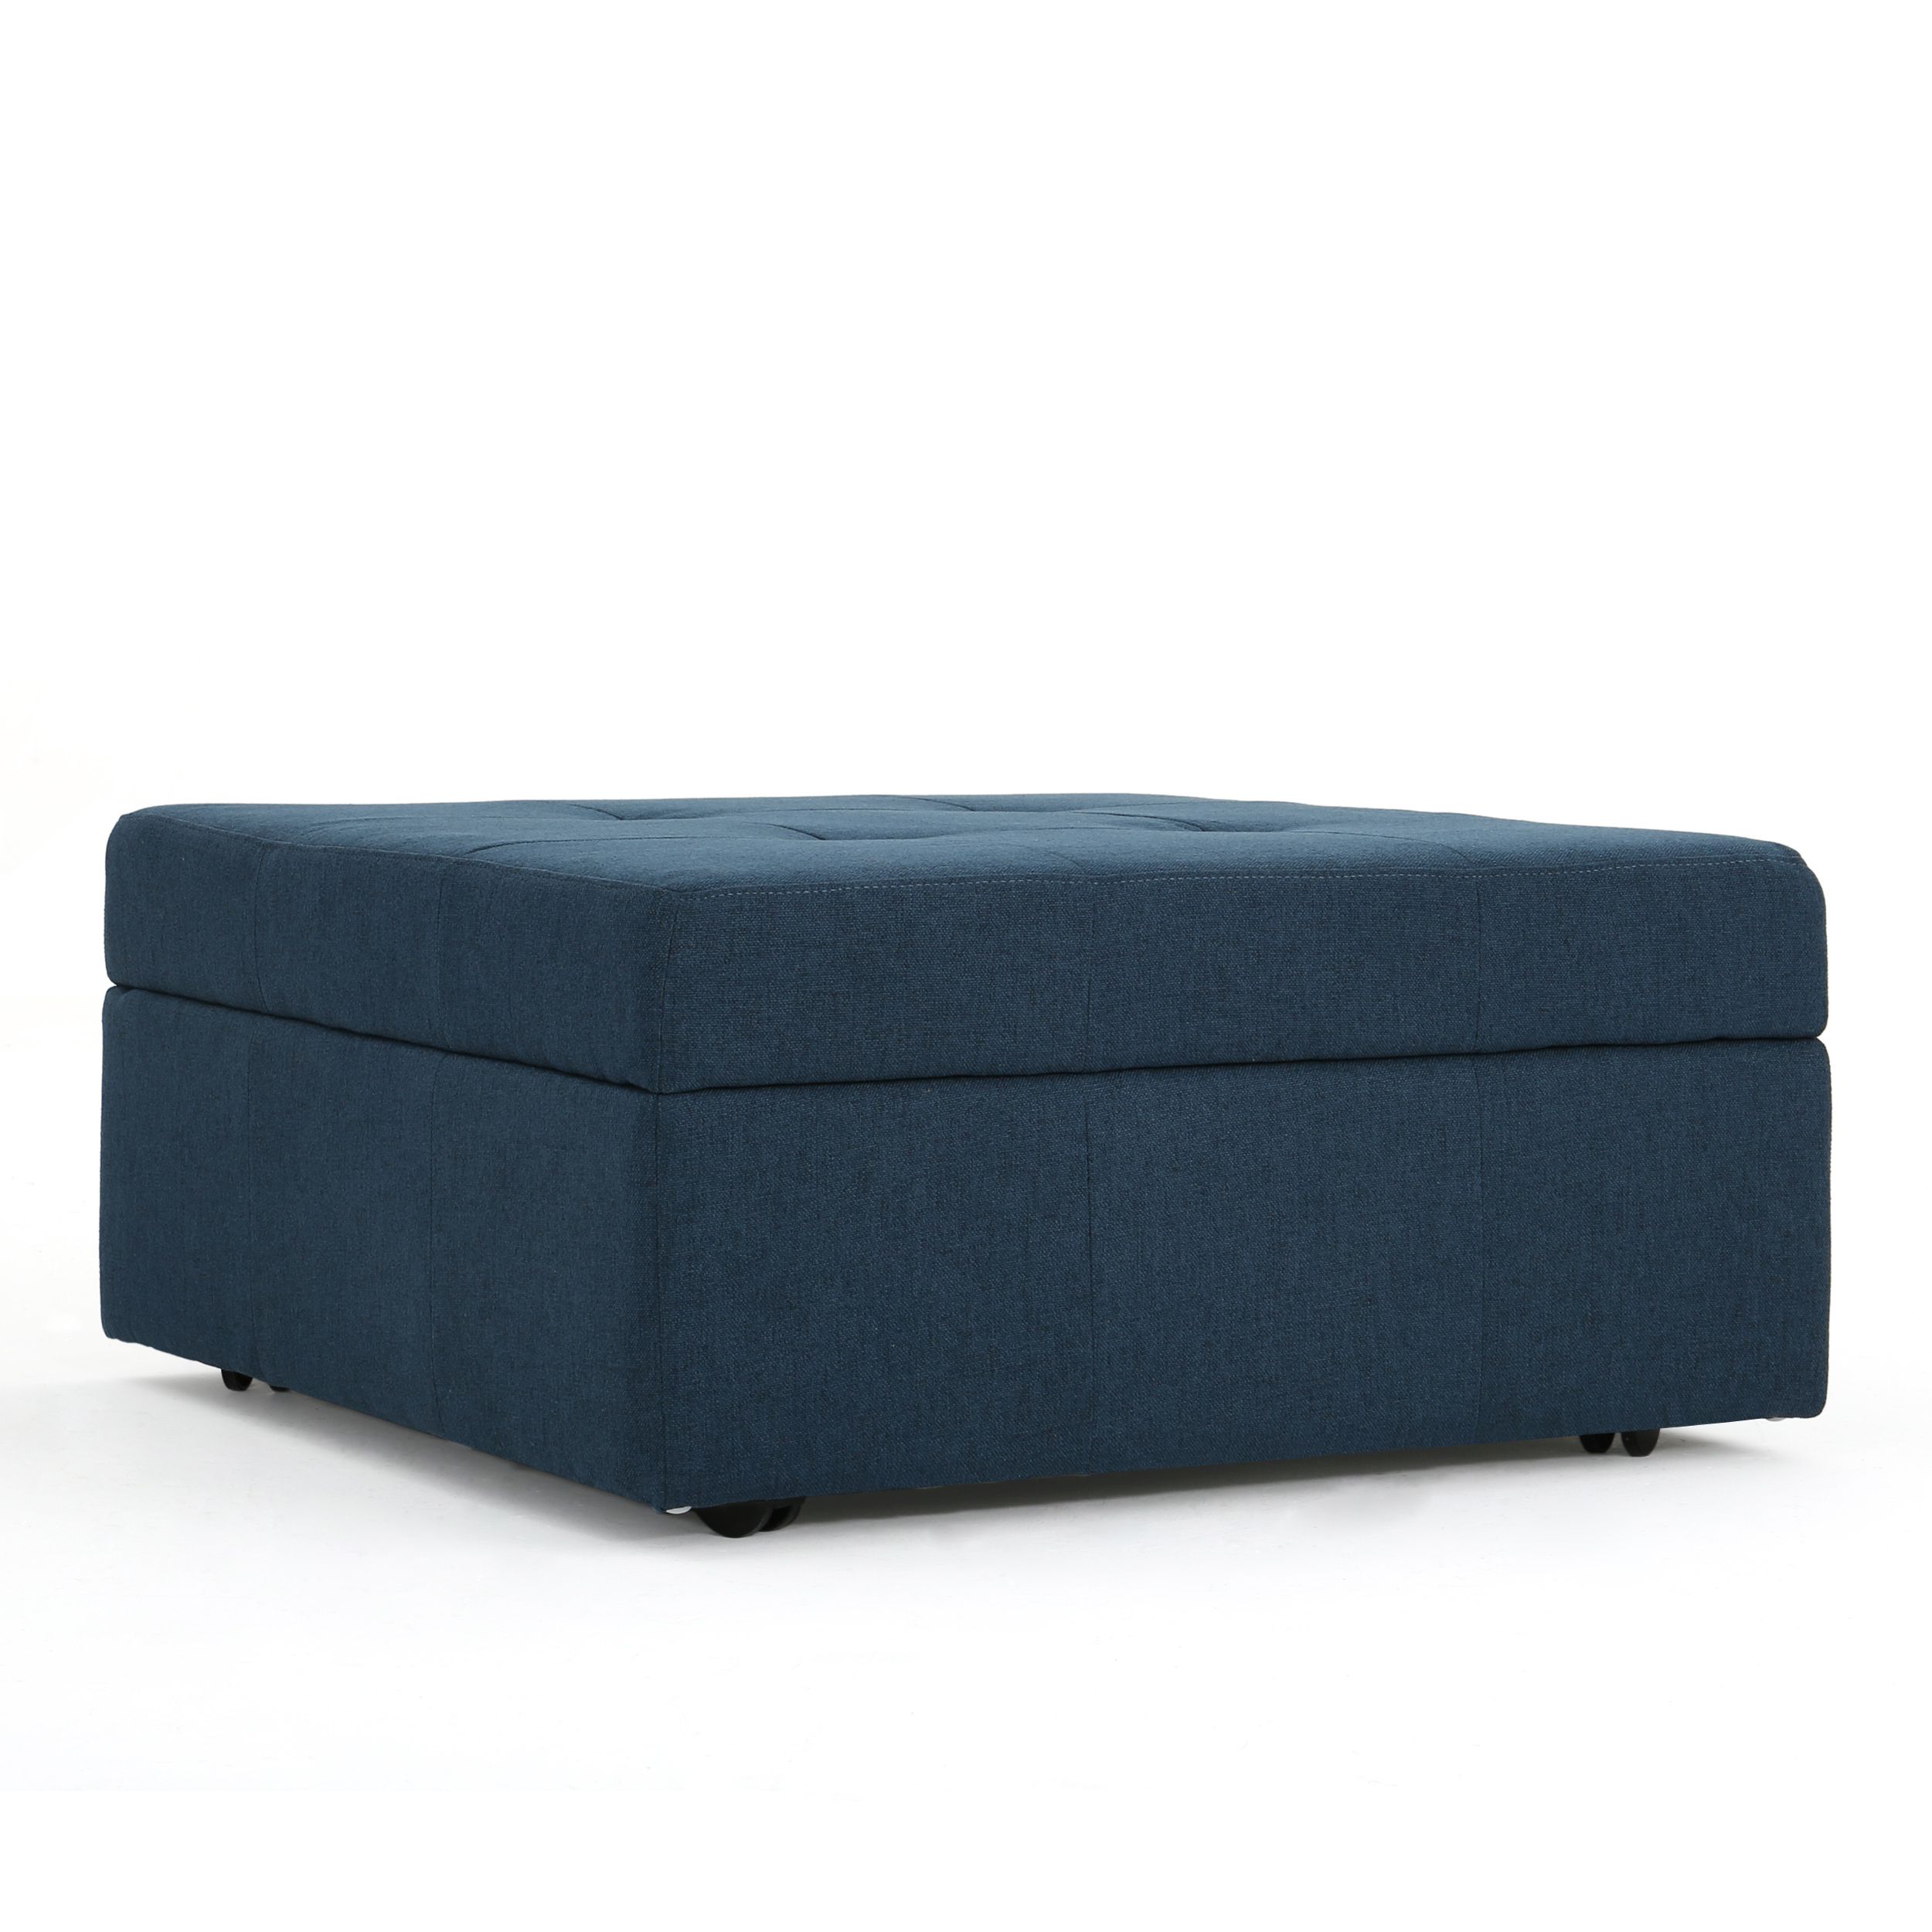 2018 Blue Fabric Tufted Surfboard Ottomans Intended For Channing Contemporary Tufted Fabric Storage Ottoman With Rolling (View 3 of 10)